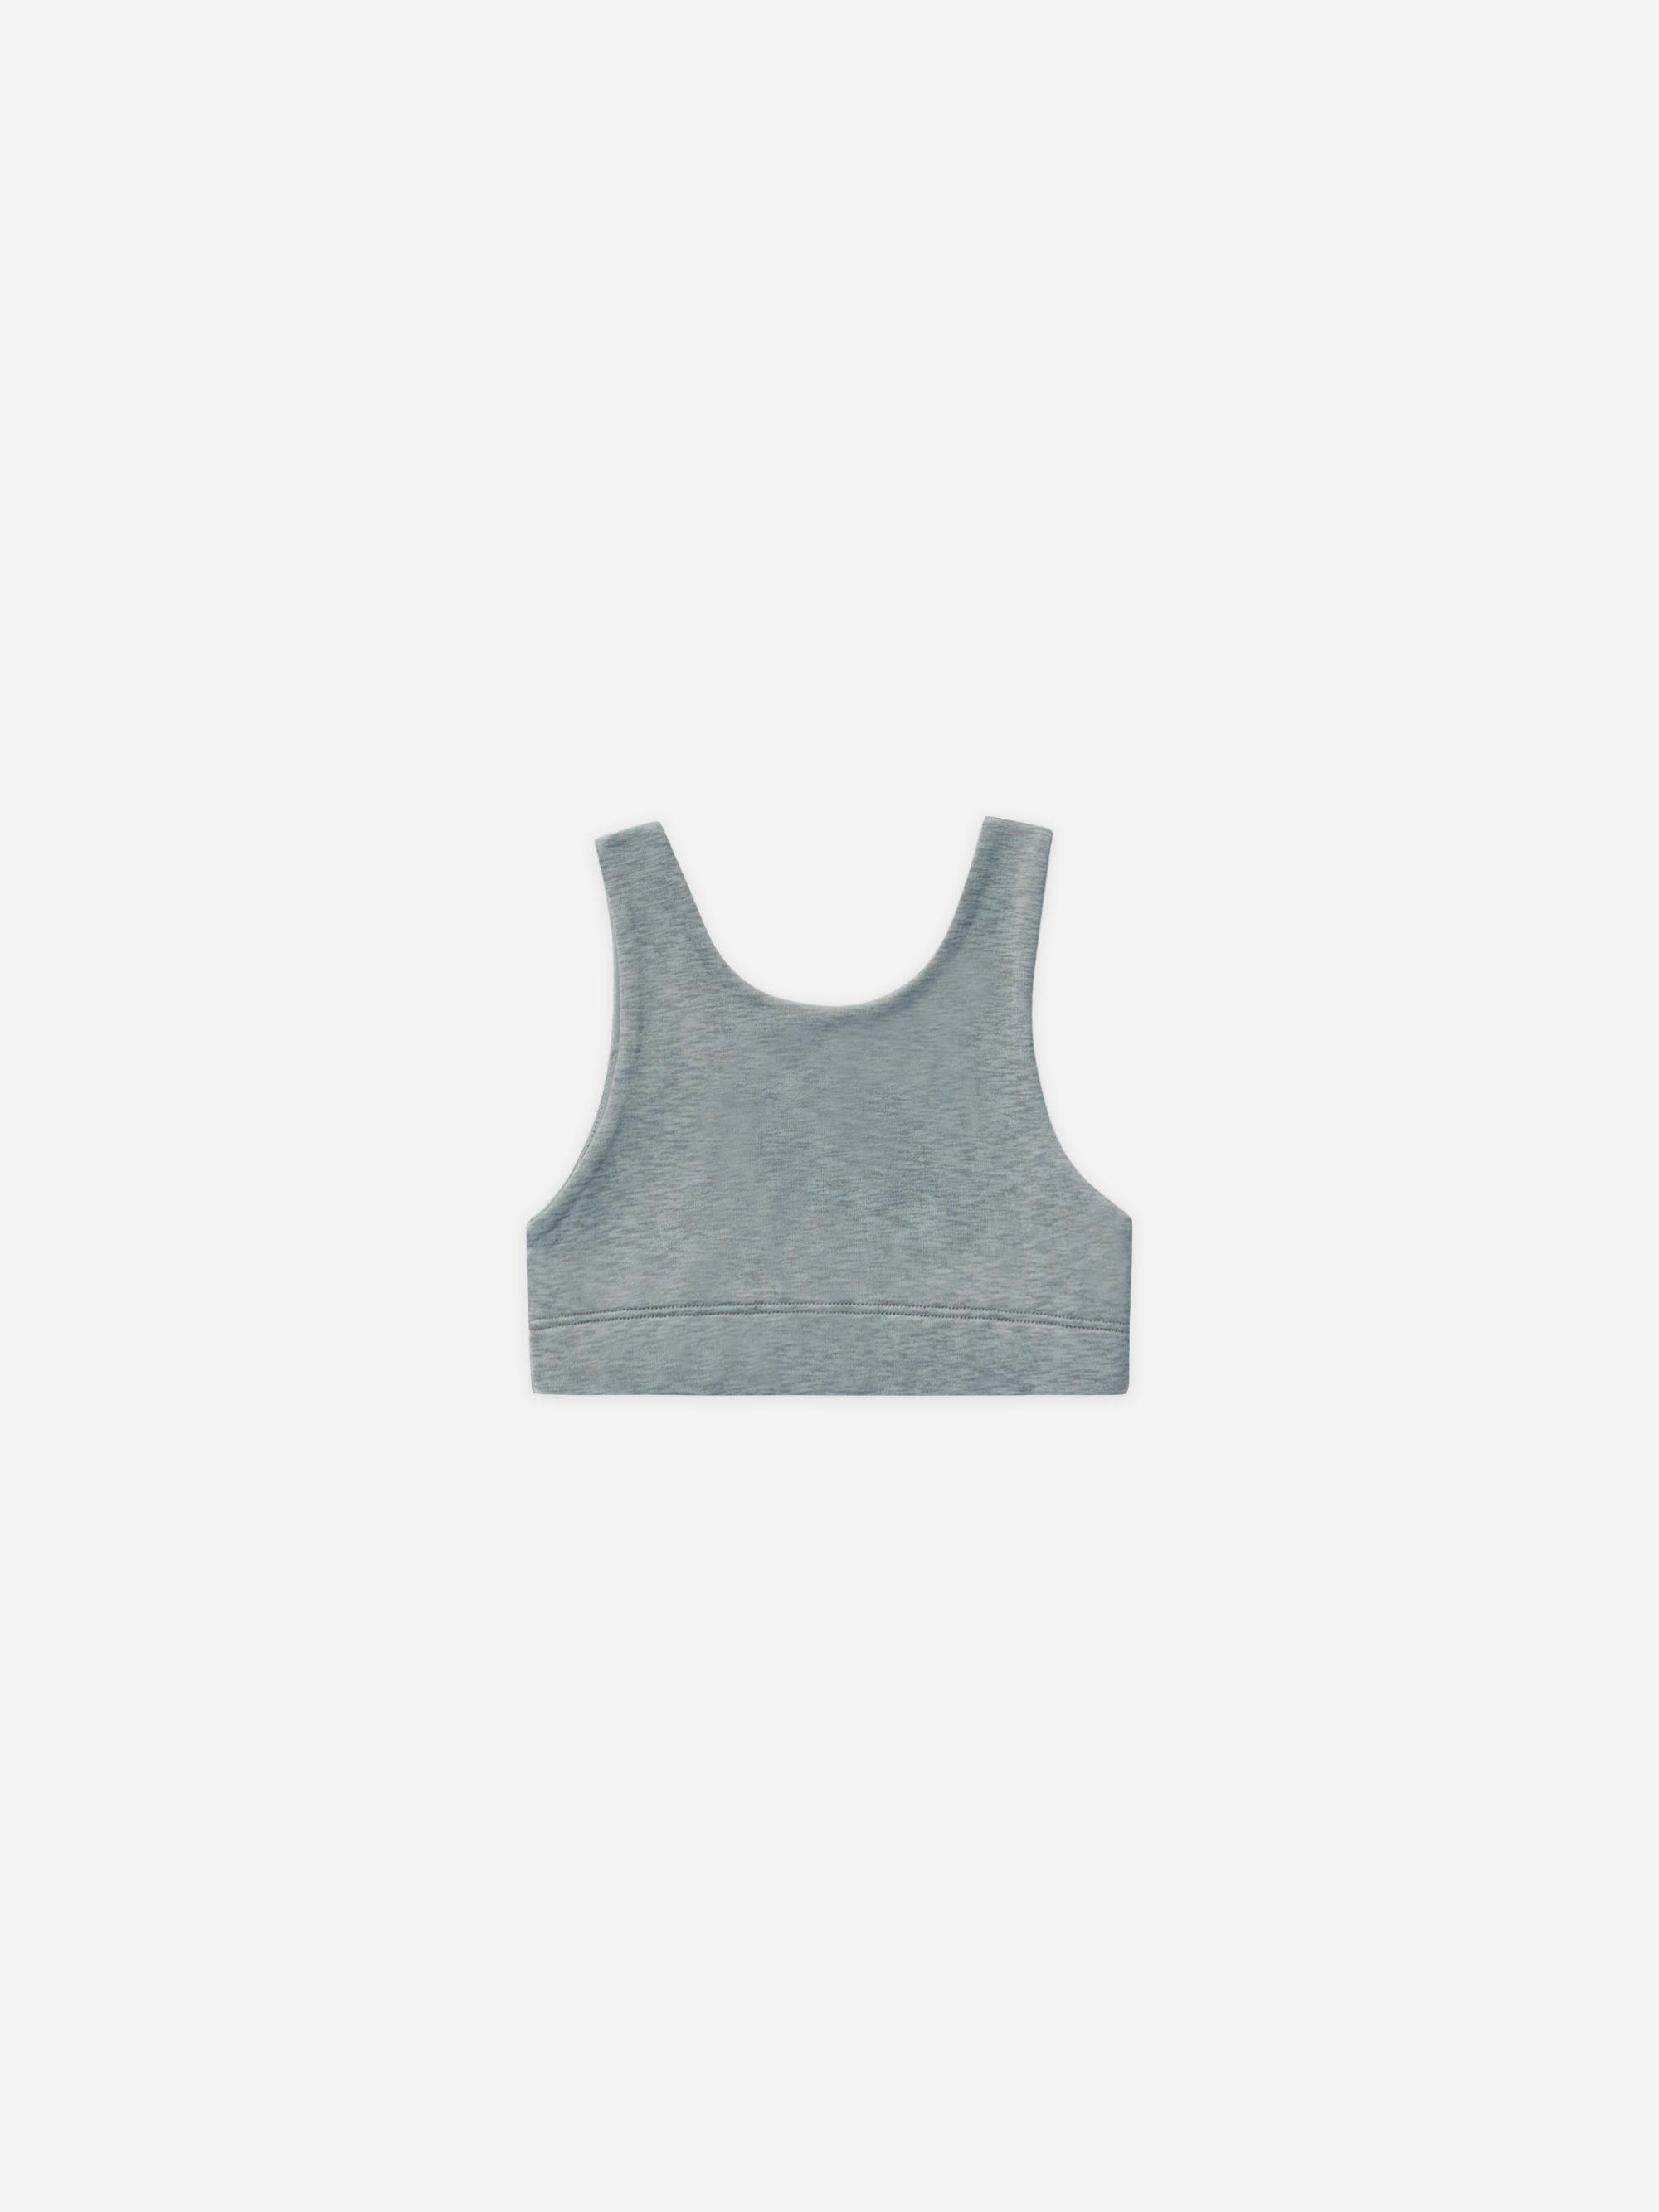 Swift Sports Bra || Heathered Indigo - Rylee + Cru | Kids Clothes | Trendy Baby Clothes | Modern Infant Outfits |